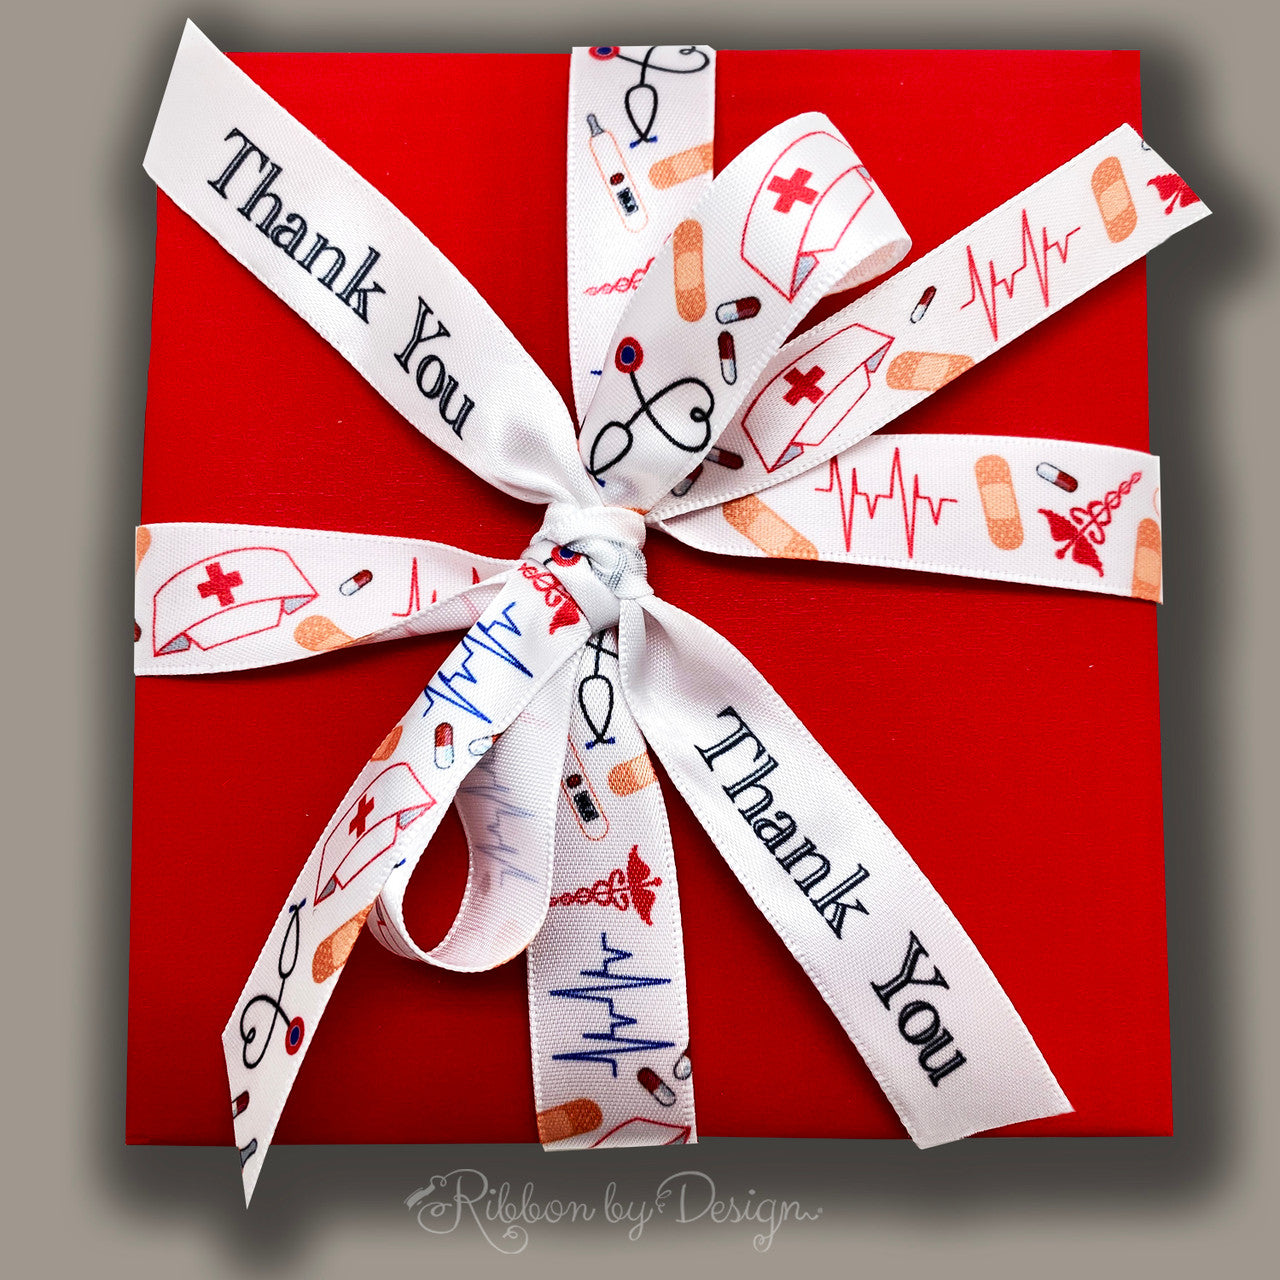 Mix our nurse ribbon with our thank you ribbon for a very personal appreciation gift for your favorite nurse!